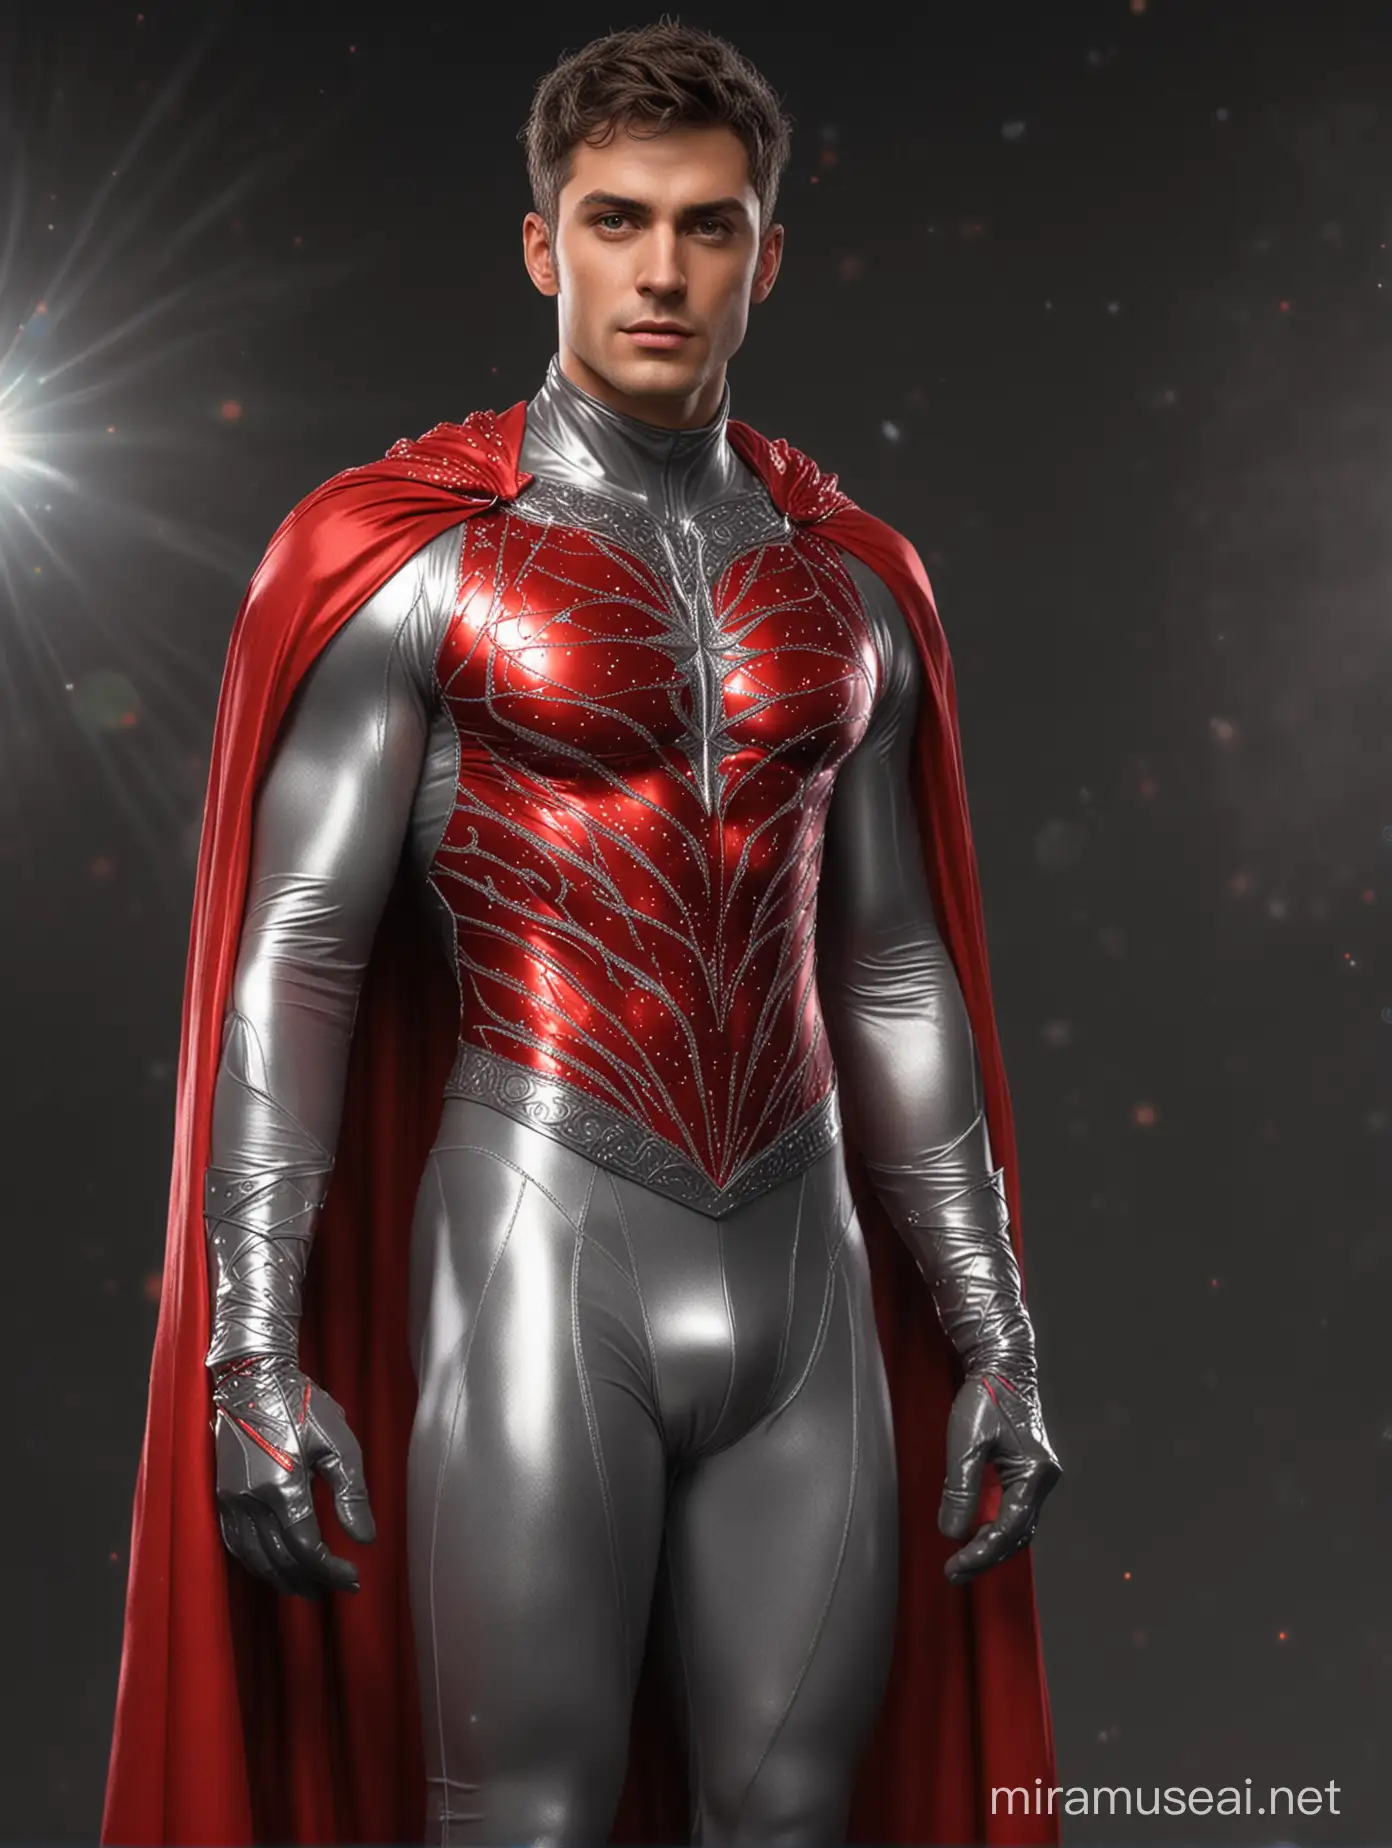 Full full body photorealistic ultra realism high definition aesthetic stabilized diffusion picture of handsome hunky fractal clean shaven  Zayne as celestial Islaw, wearing Very red and silver sparkling biomorphic transparent overall tight fit spandex and gloves.. red cape, standing in with hand on the hips.